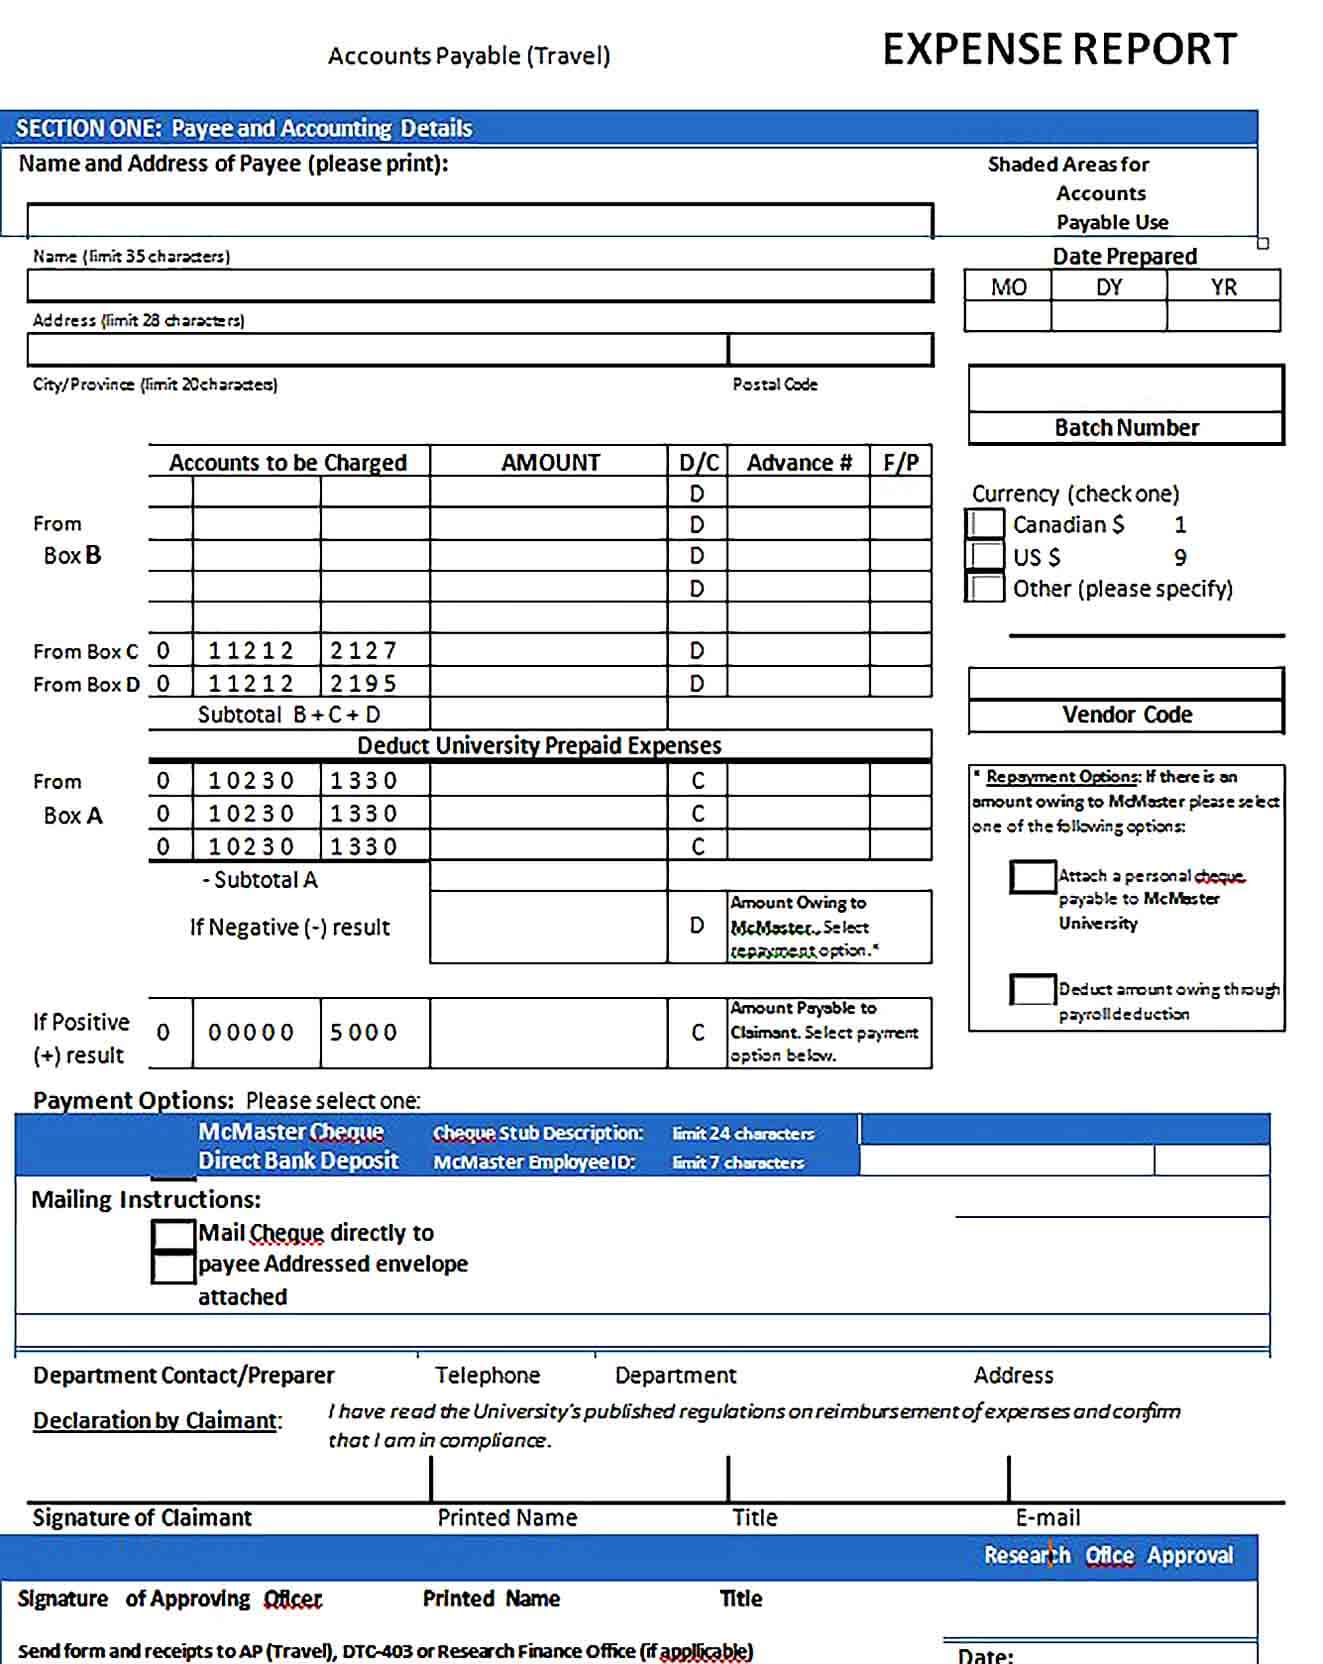 Sample Expense Report Template 2